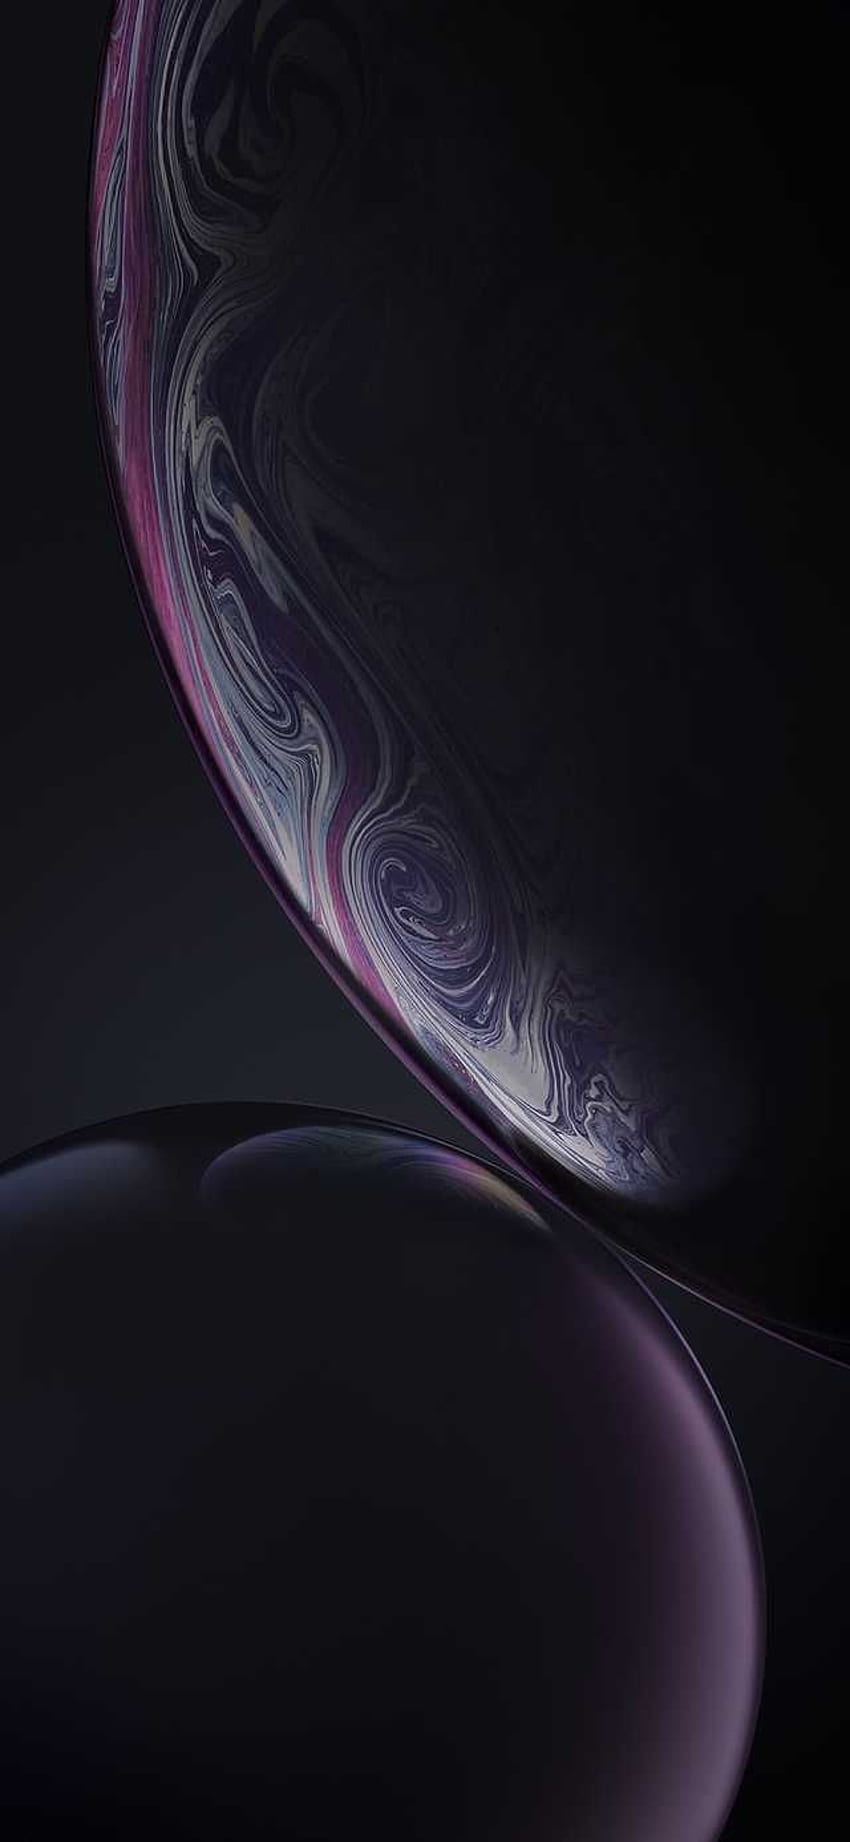 True black and OLEDoptimized wallpapers for iPhone XS